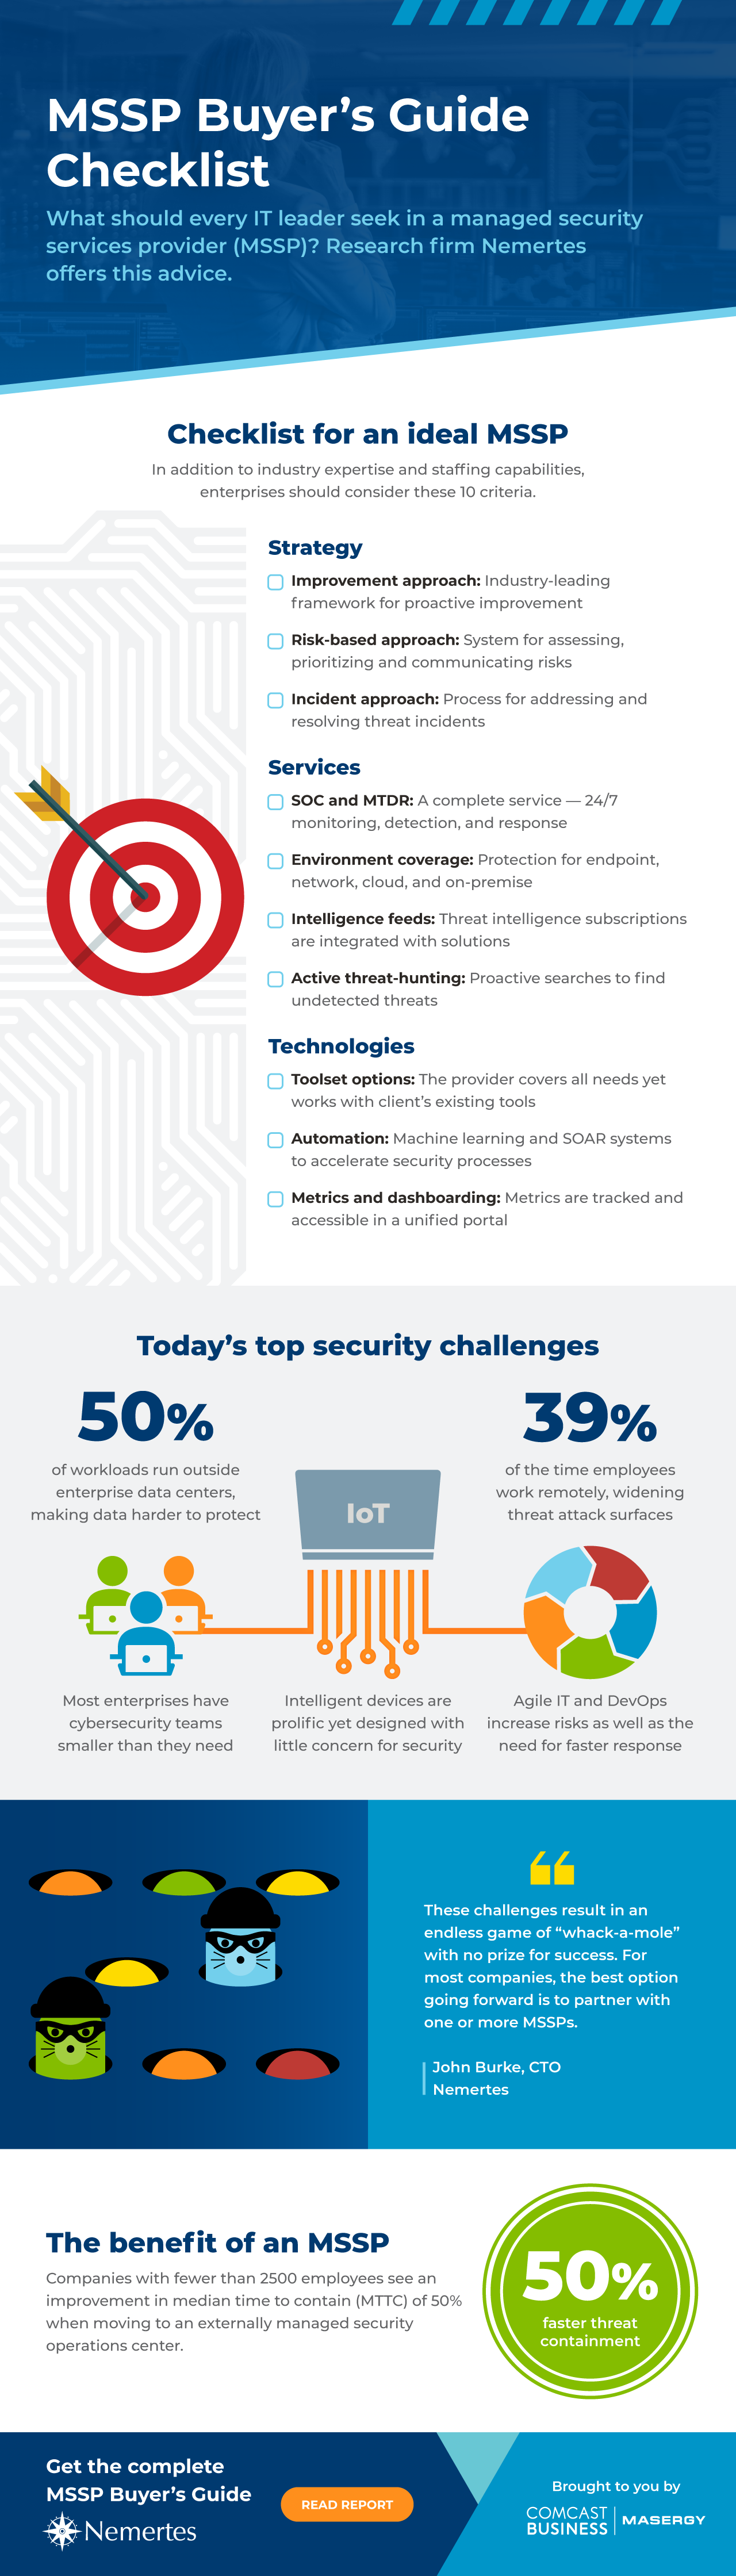 Infographic: Managed Security Services Provider Buyer’s Guide Checklist